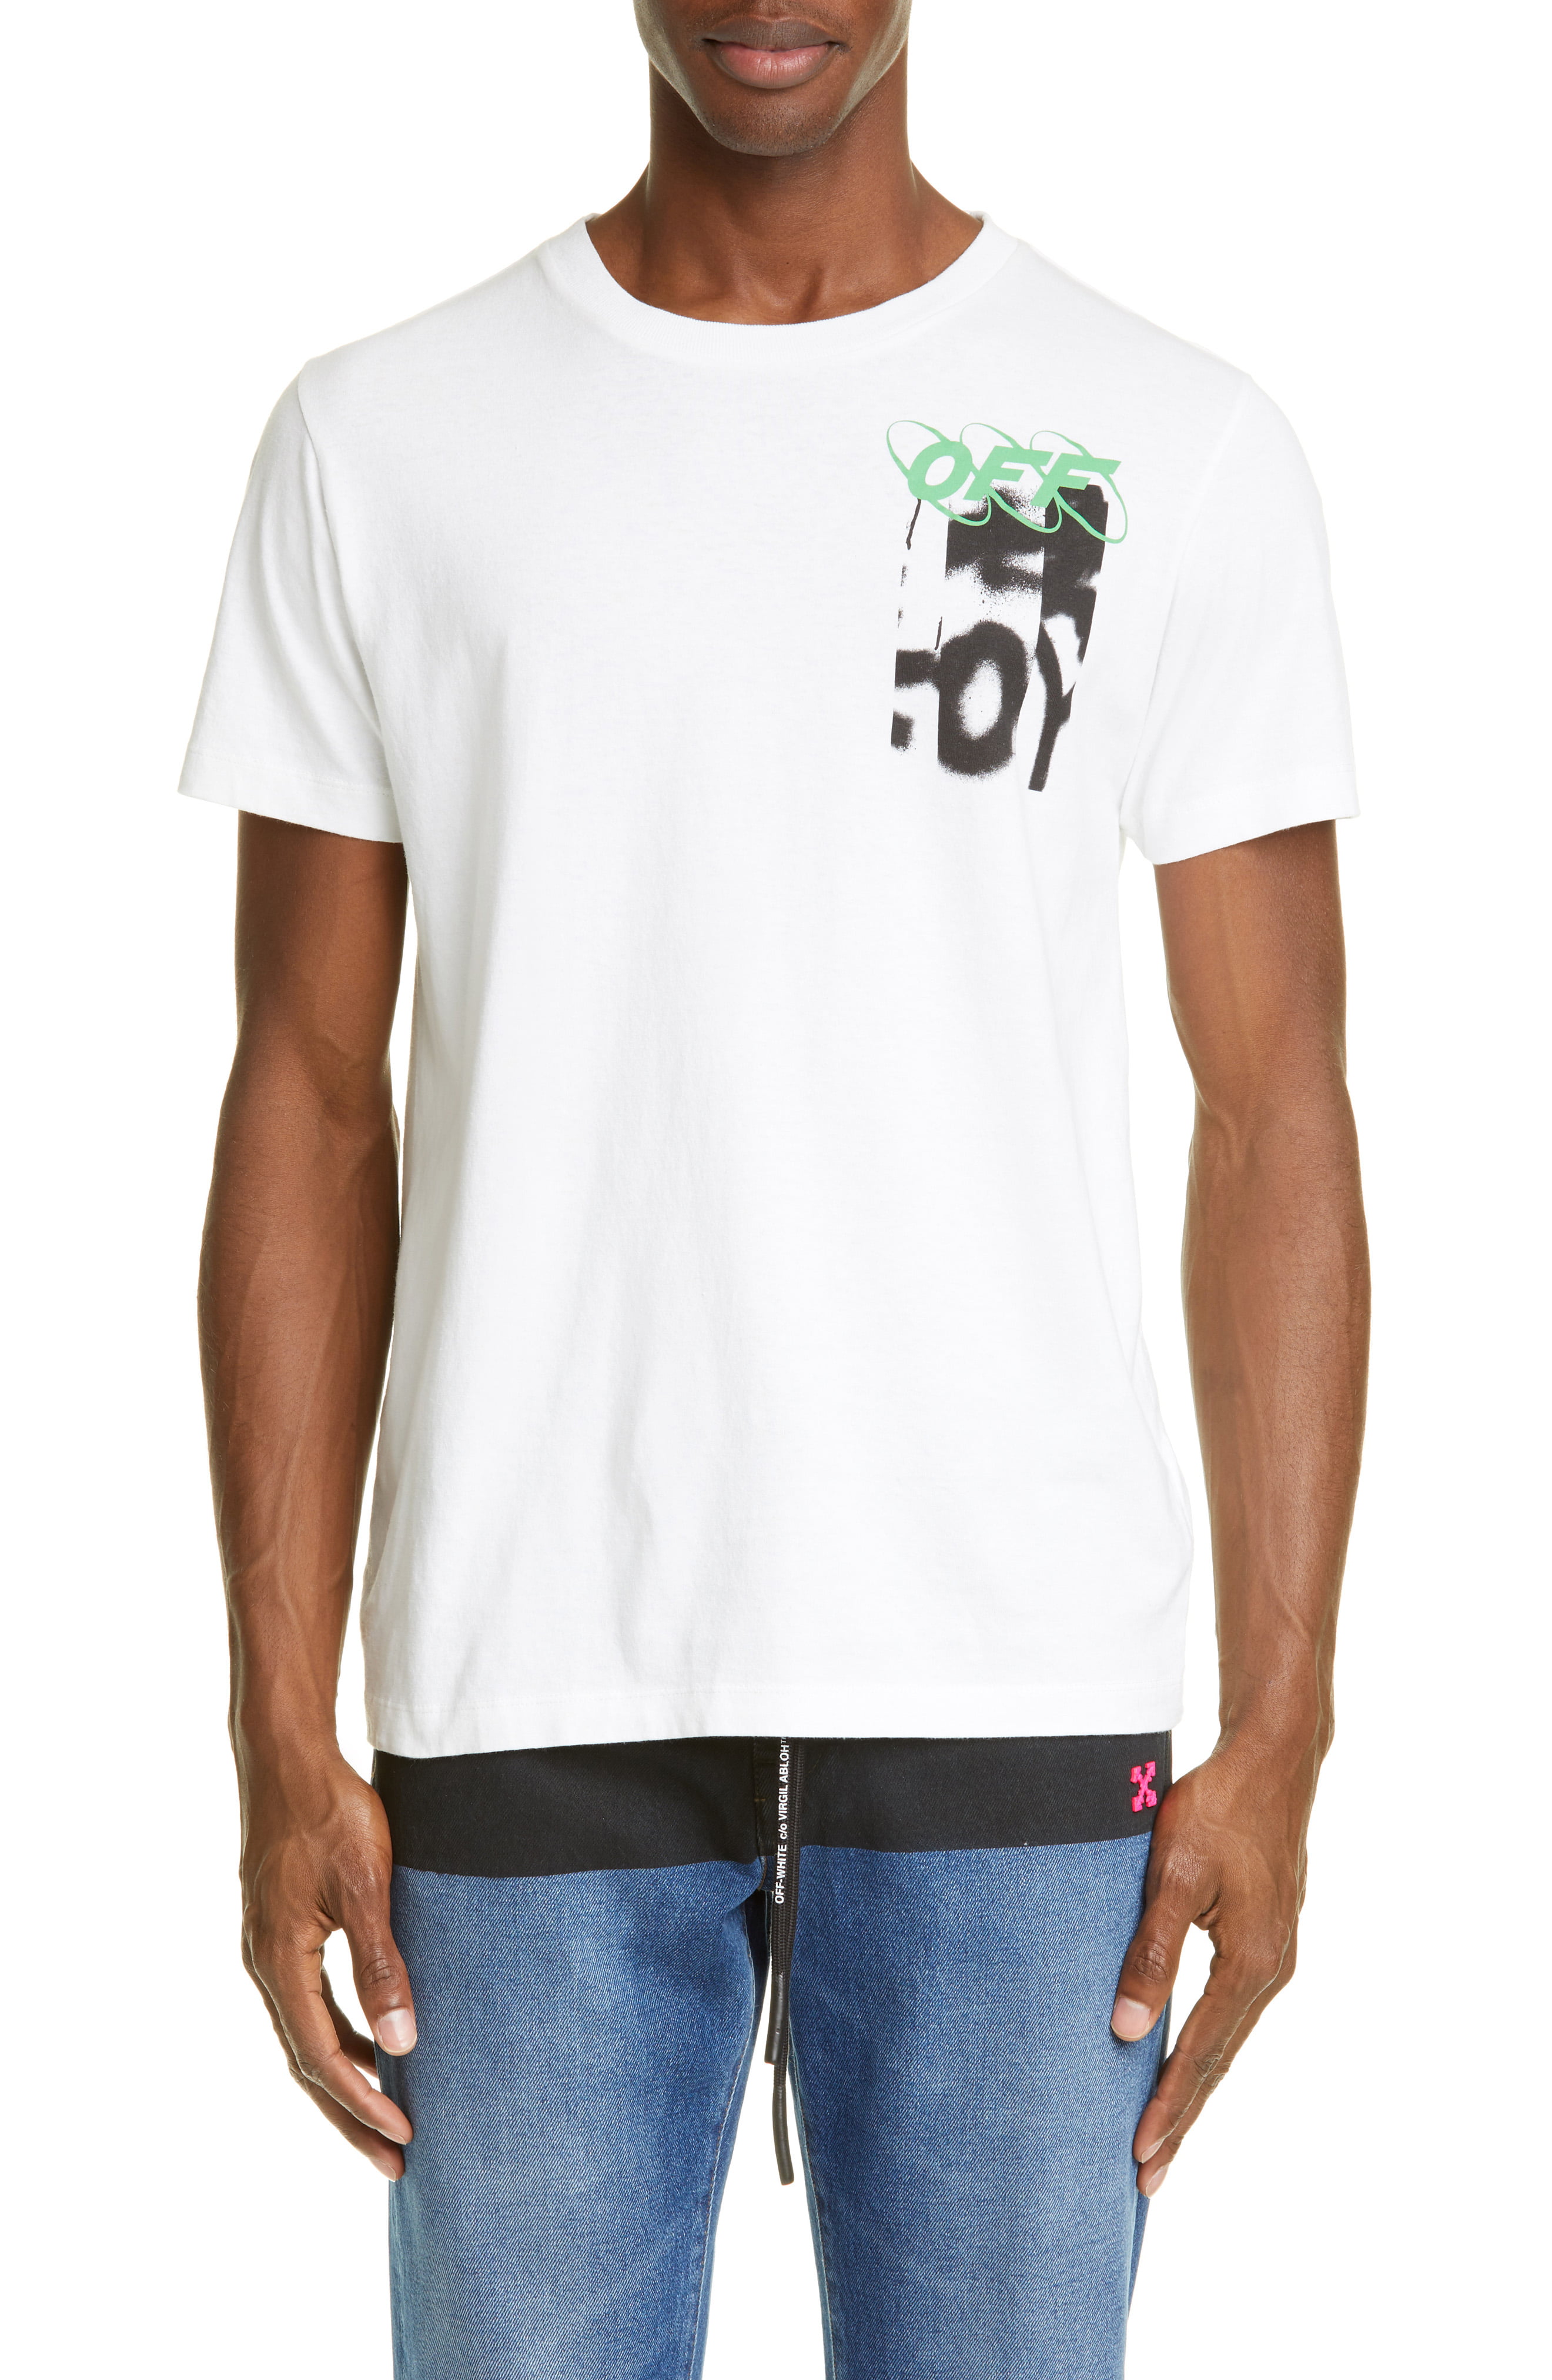 Men’s Off-White Slim Fit Spray Blurred Graphic T-Shirt, Size X-Small